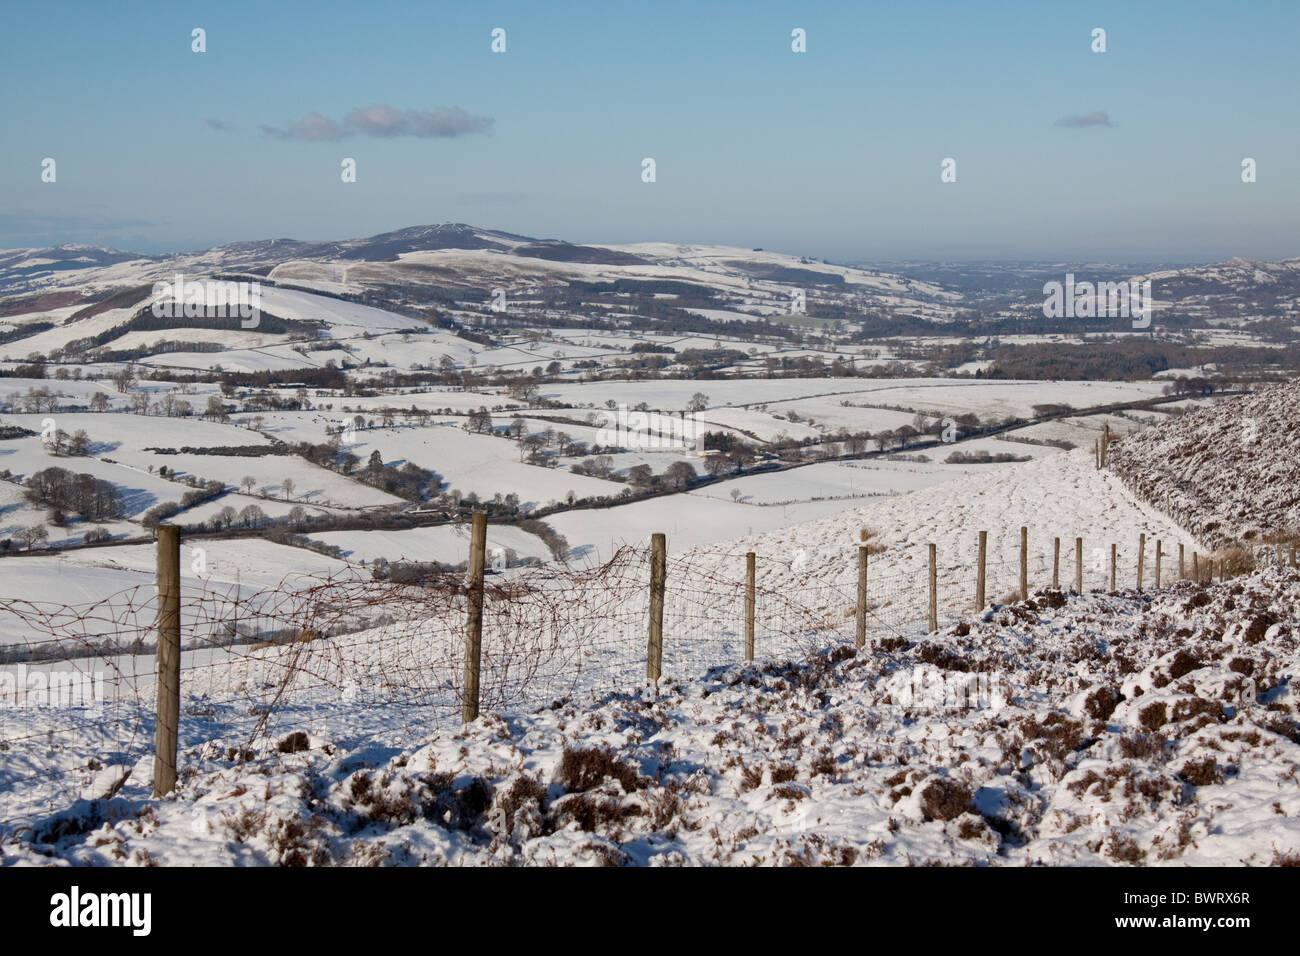 Moel Famua in the Clwydian range of hills, Wales, in winter, from the slopes of Moel y Gamelin Stock Photo